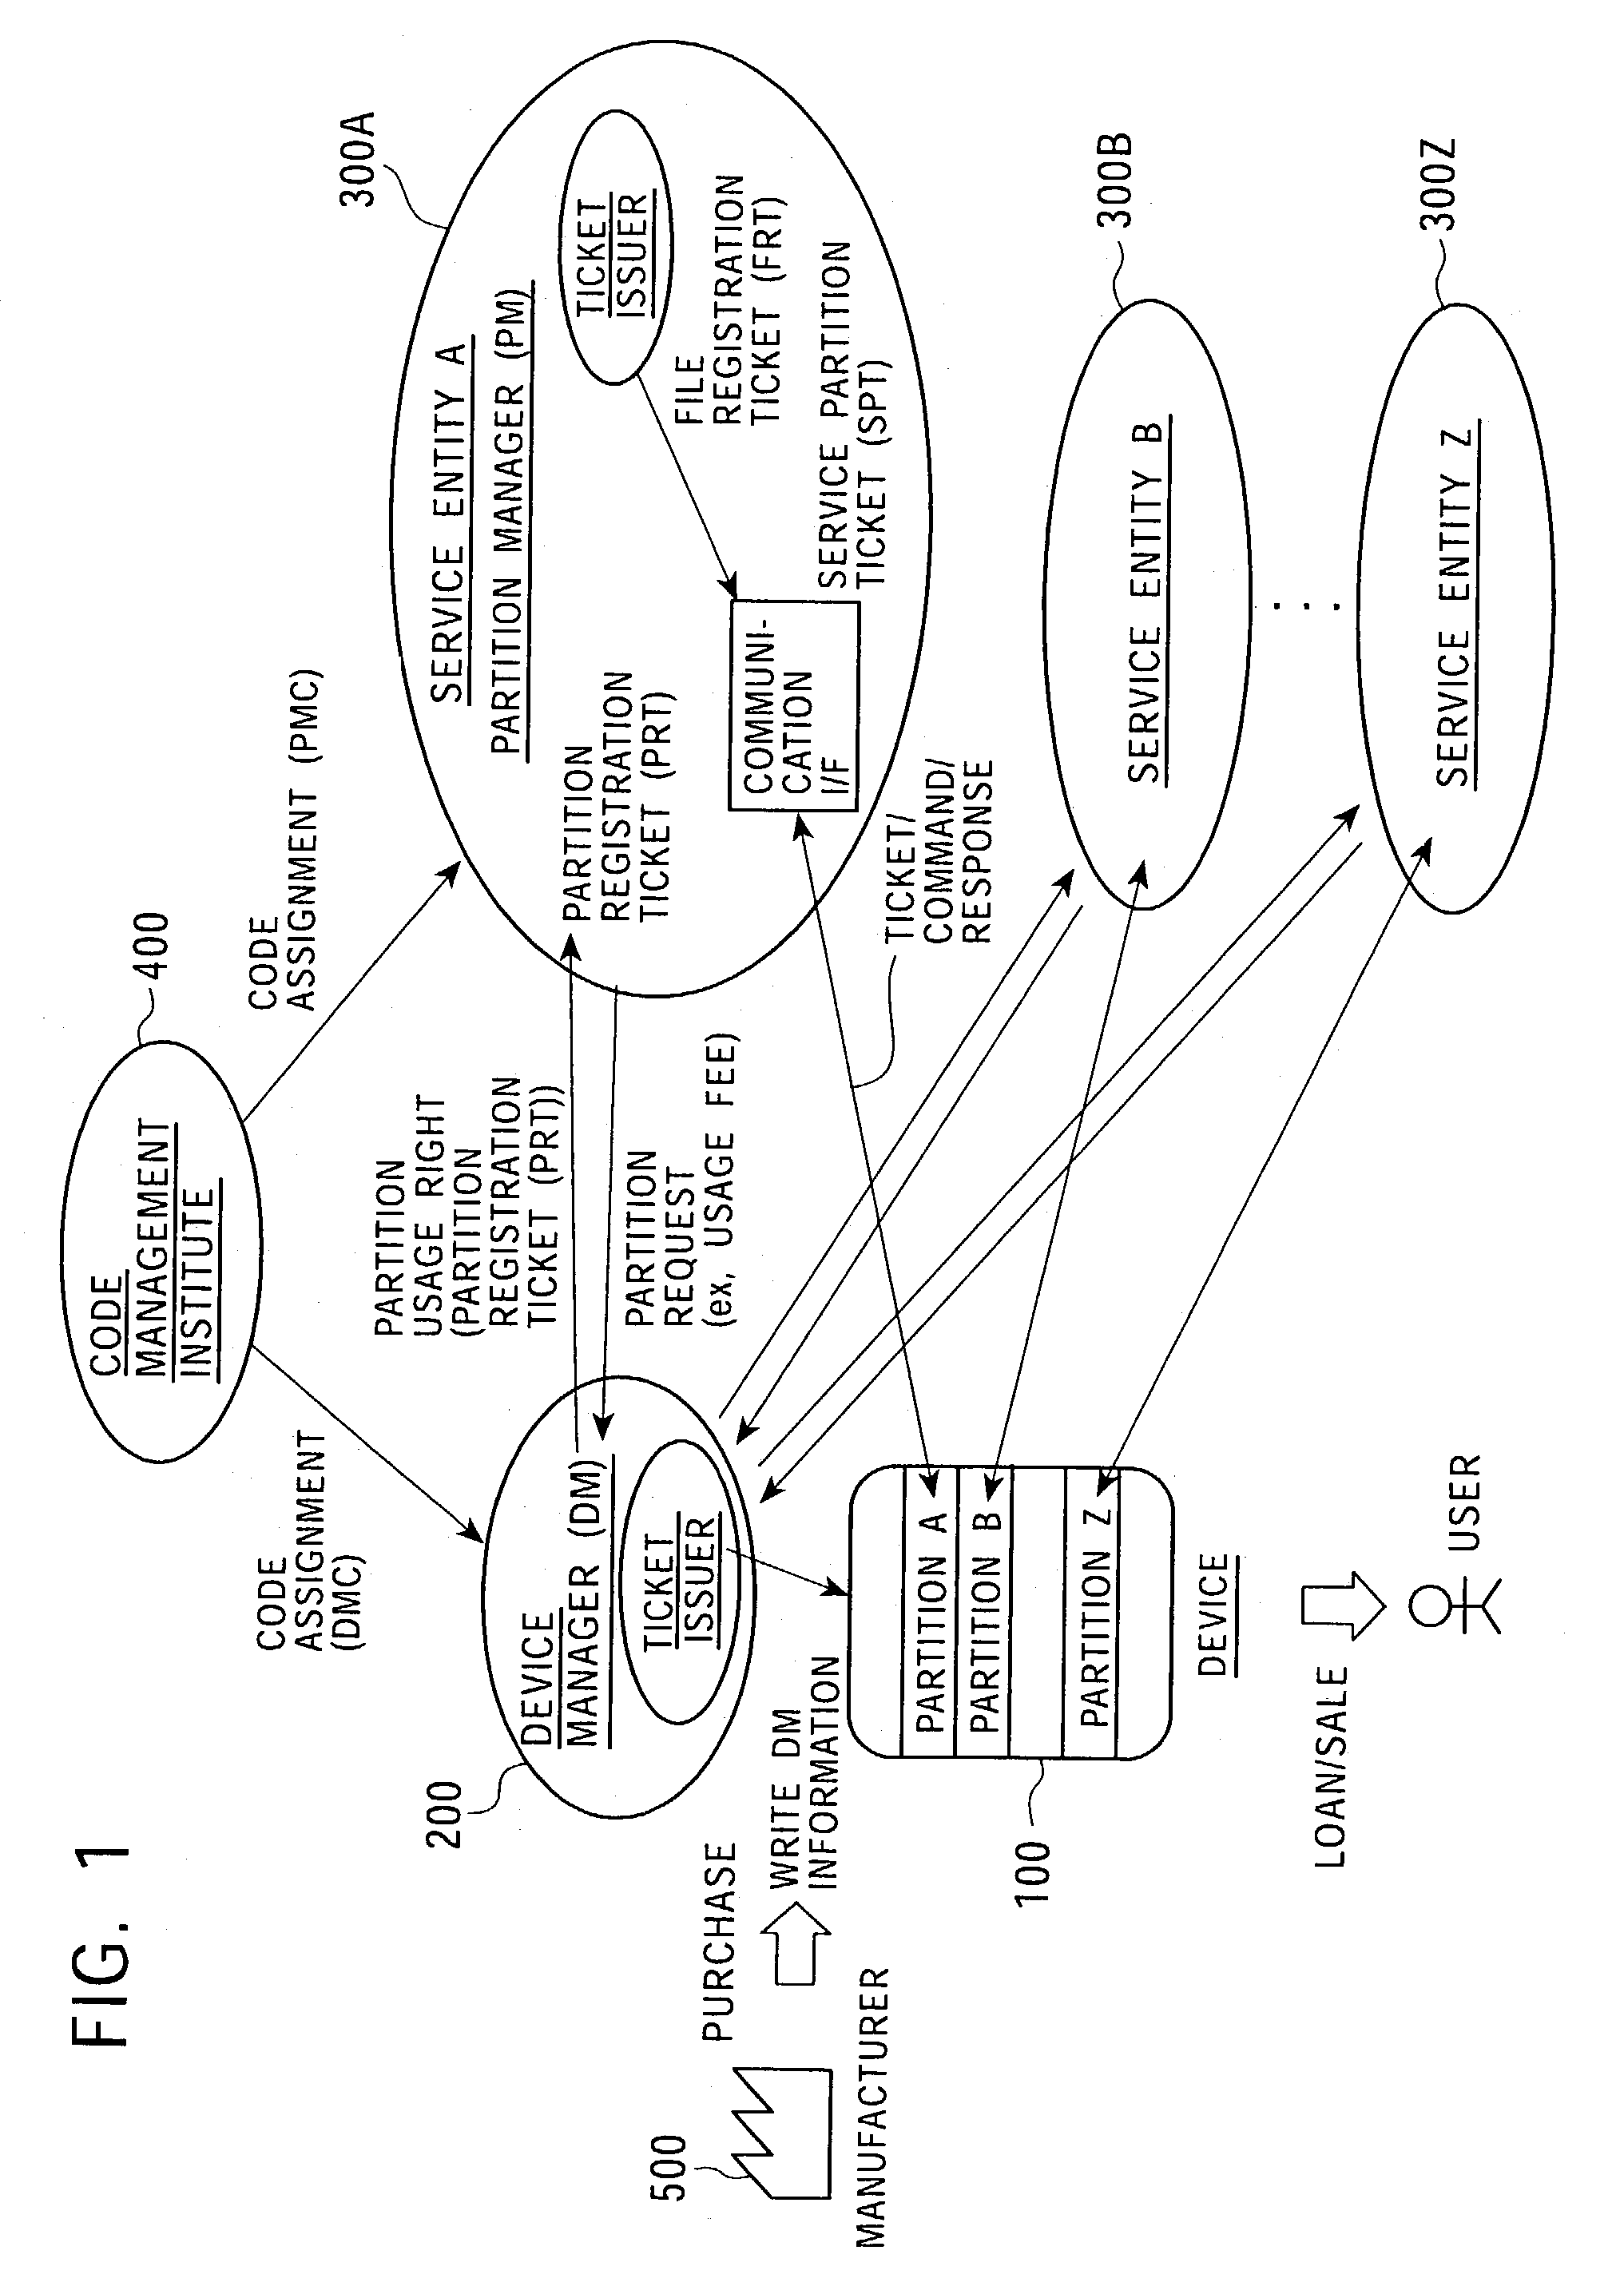 Memory access control system and management method using access control ticket